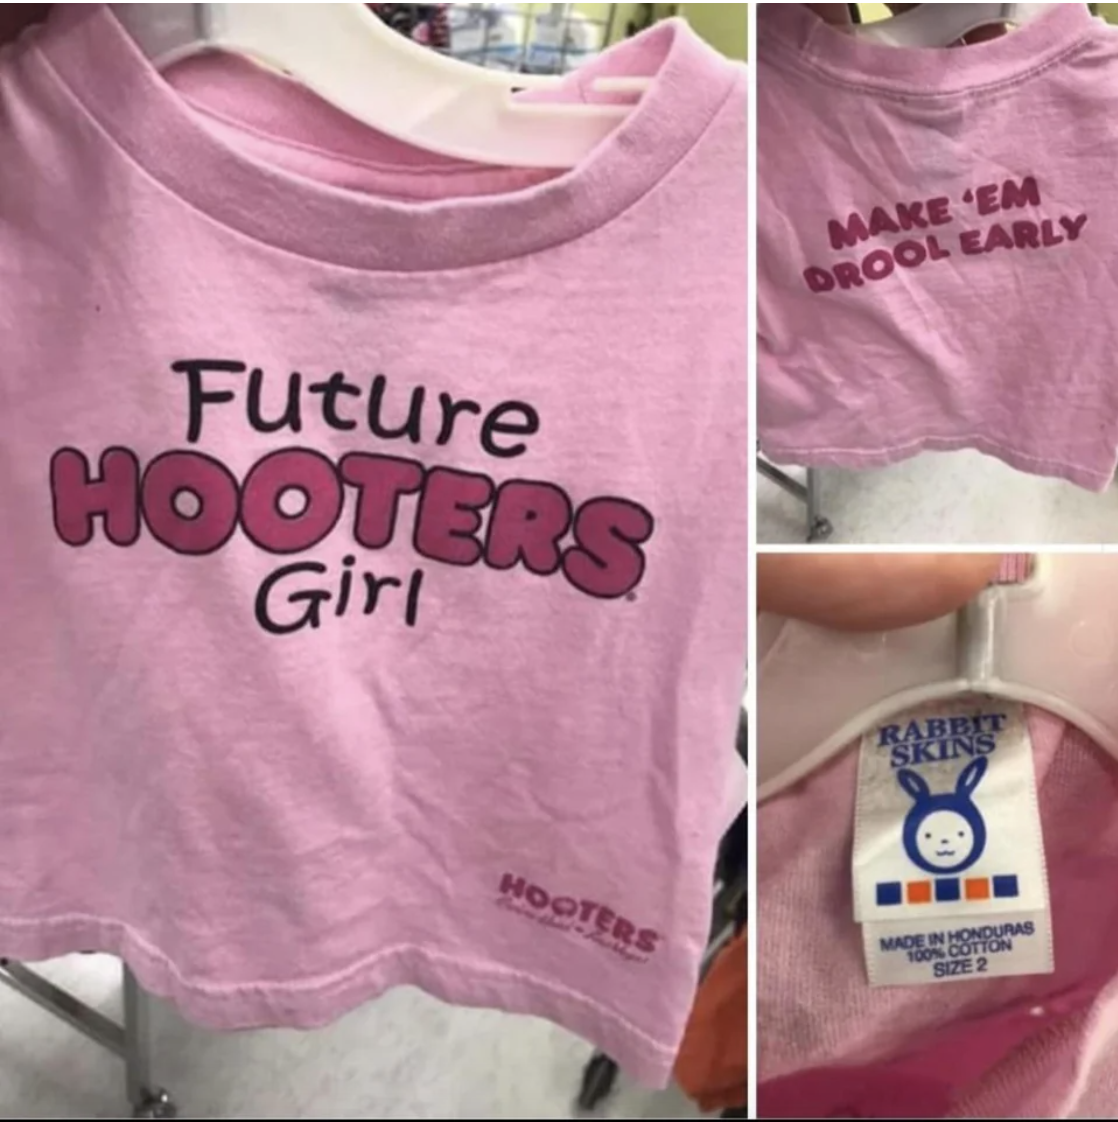 The front of the shirt says &quot;future Hooters girl,&quot; and the back says &quot;make &#x27;em drool early&quot;